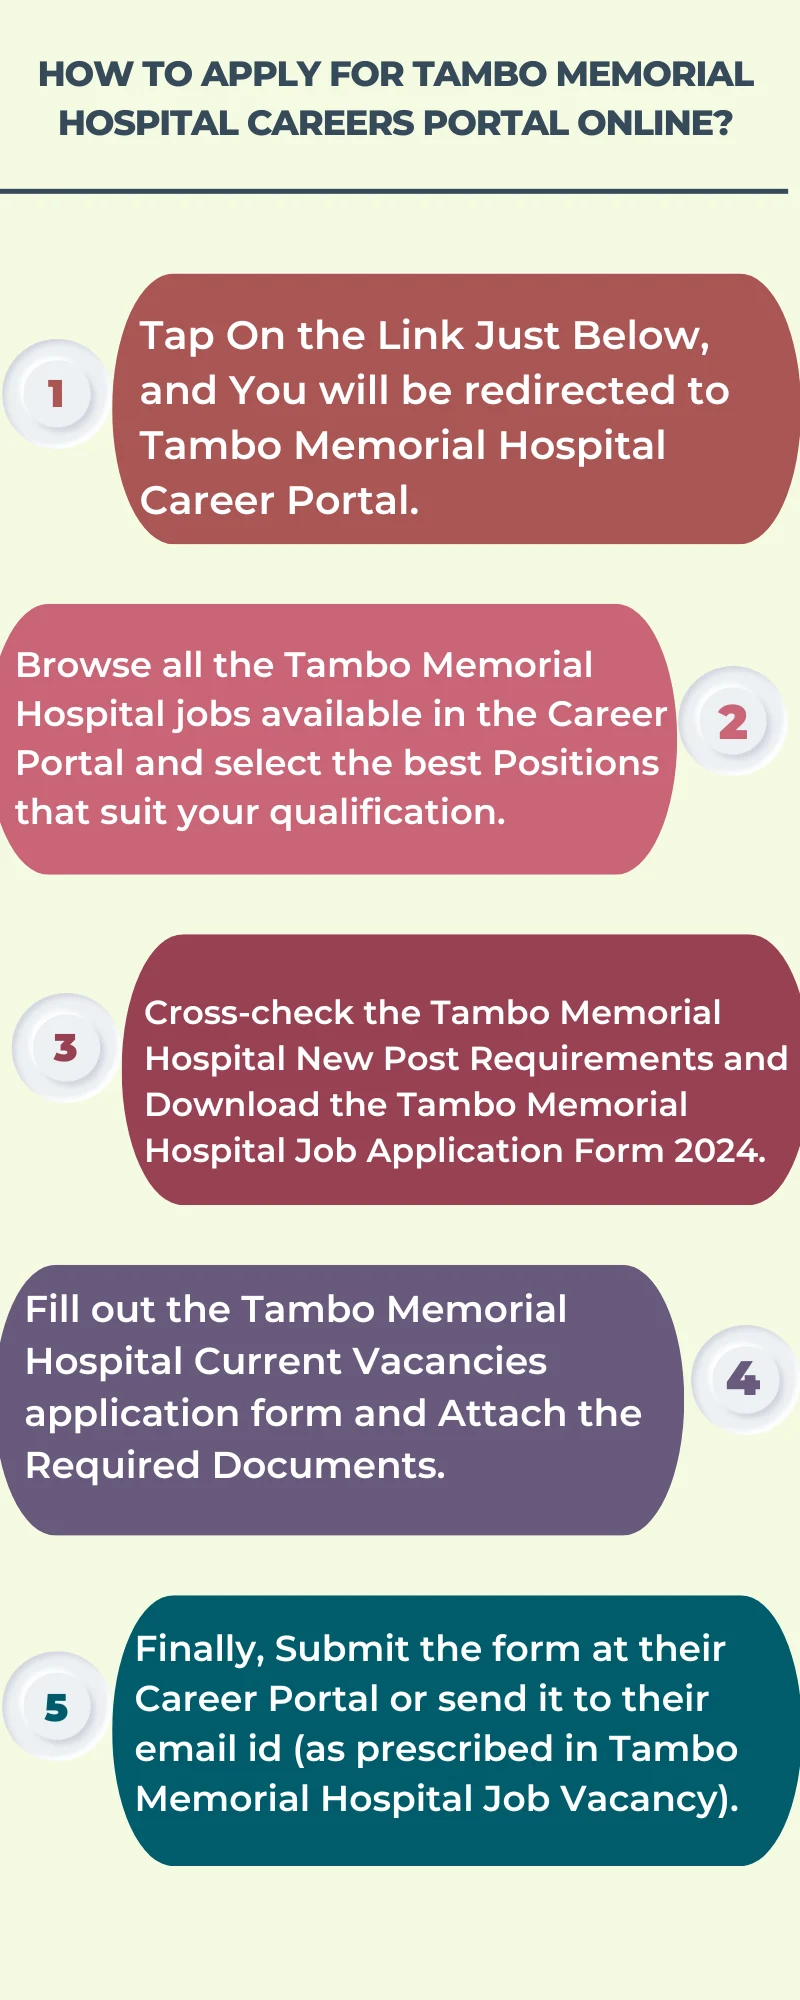 How To Apply for Tambo Memorial Hospital Careers Portal Online?